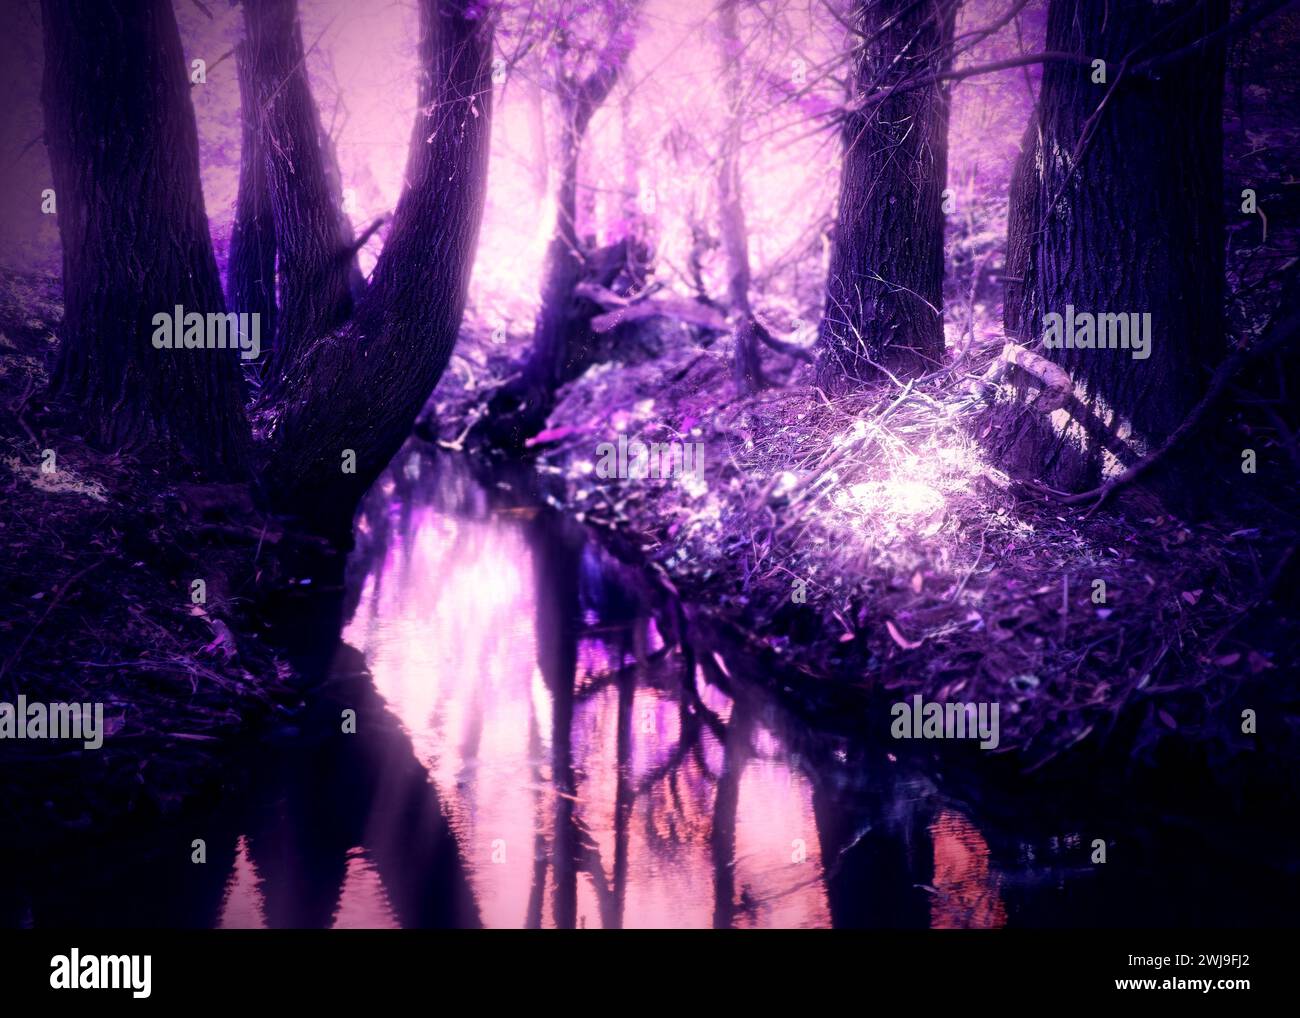 Trees and small river in the fantastic purple forest, photo manipulation. Stock Photo